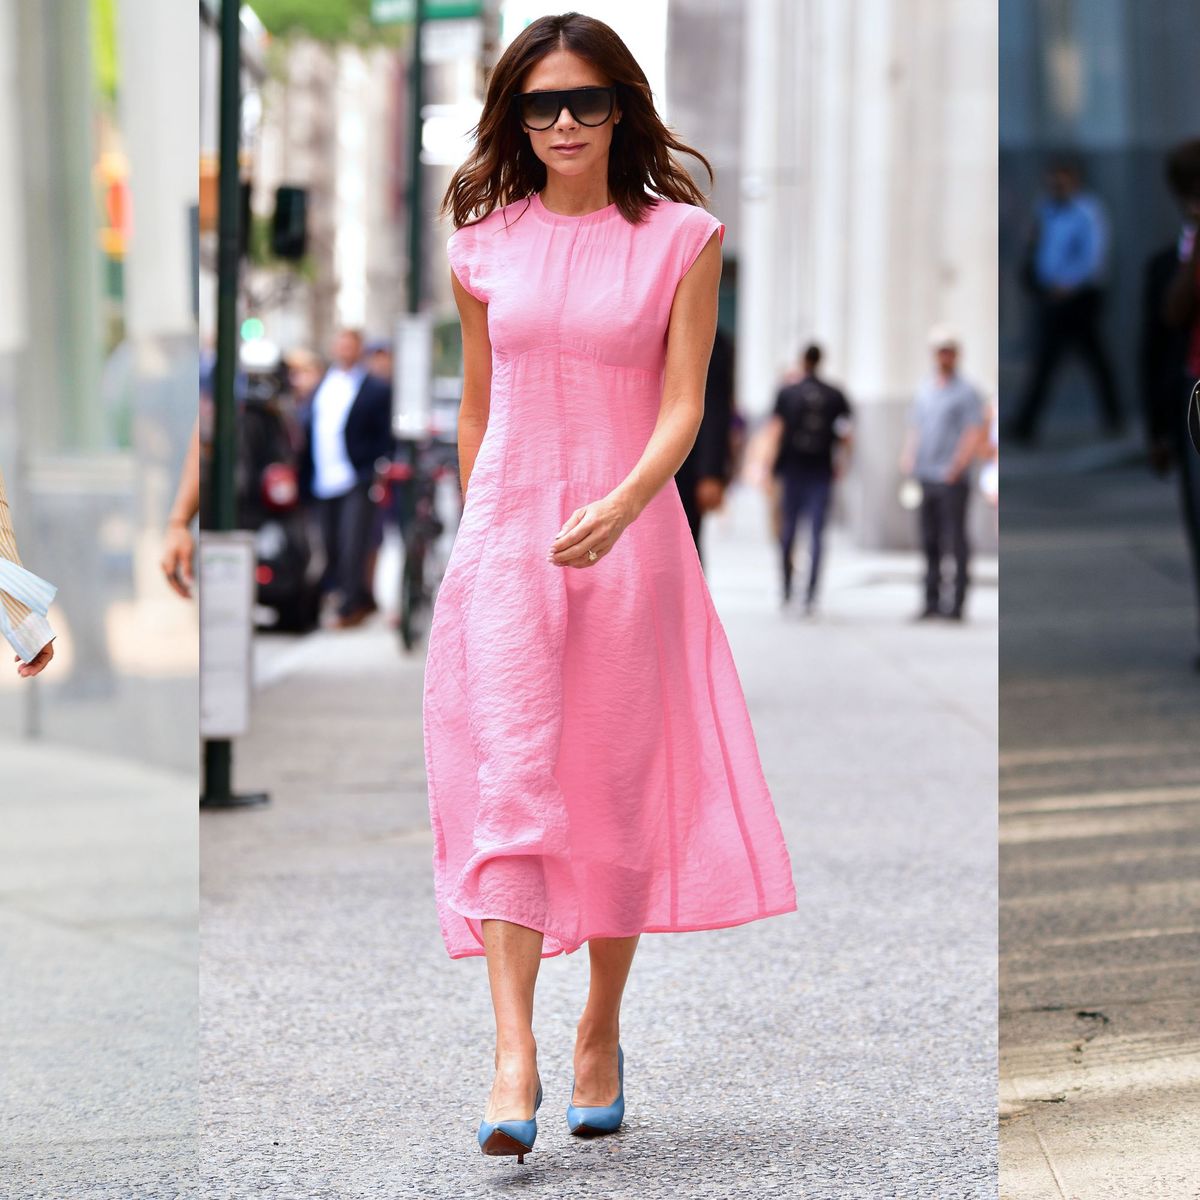 Victoria Beckham Wore a Bright Pink Dress in New York City | Marie Claire